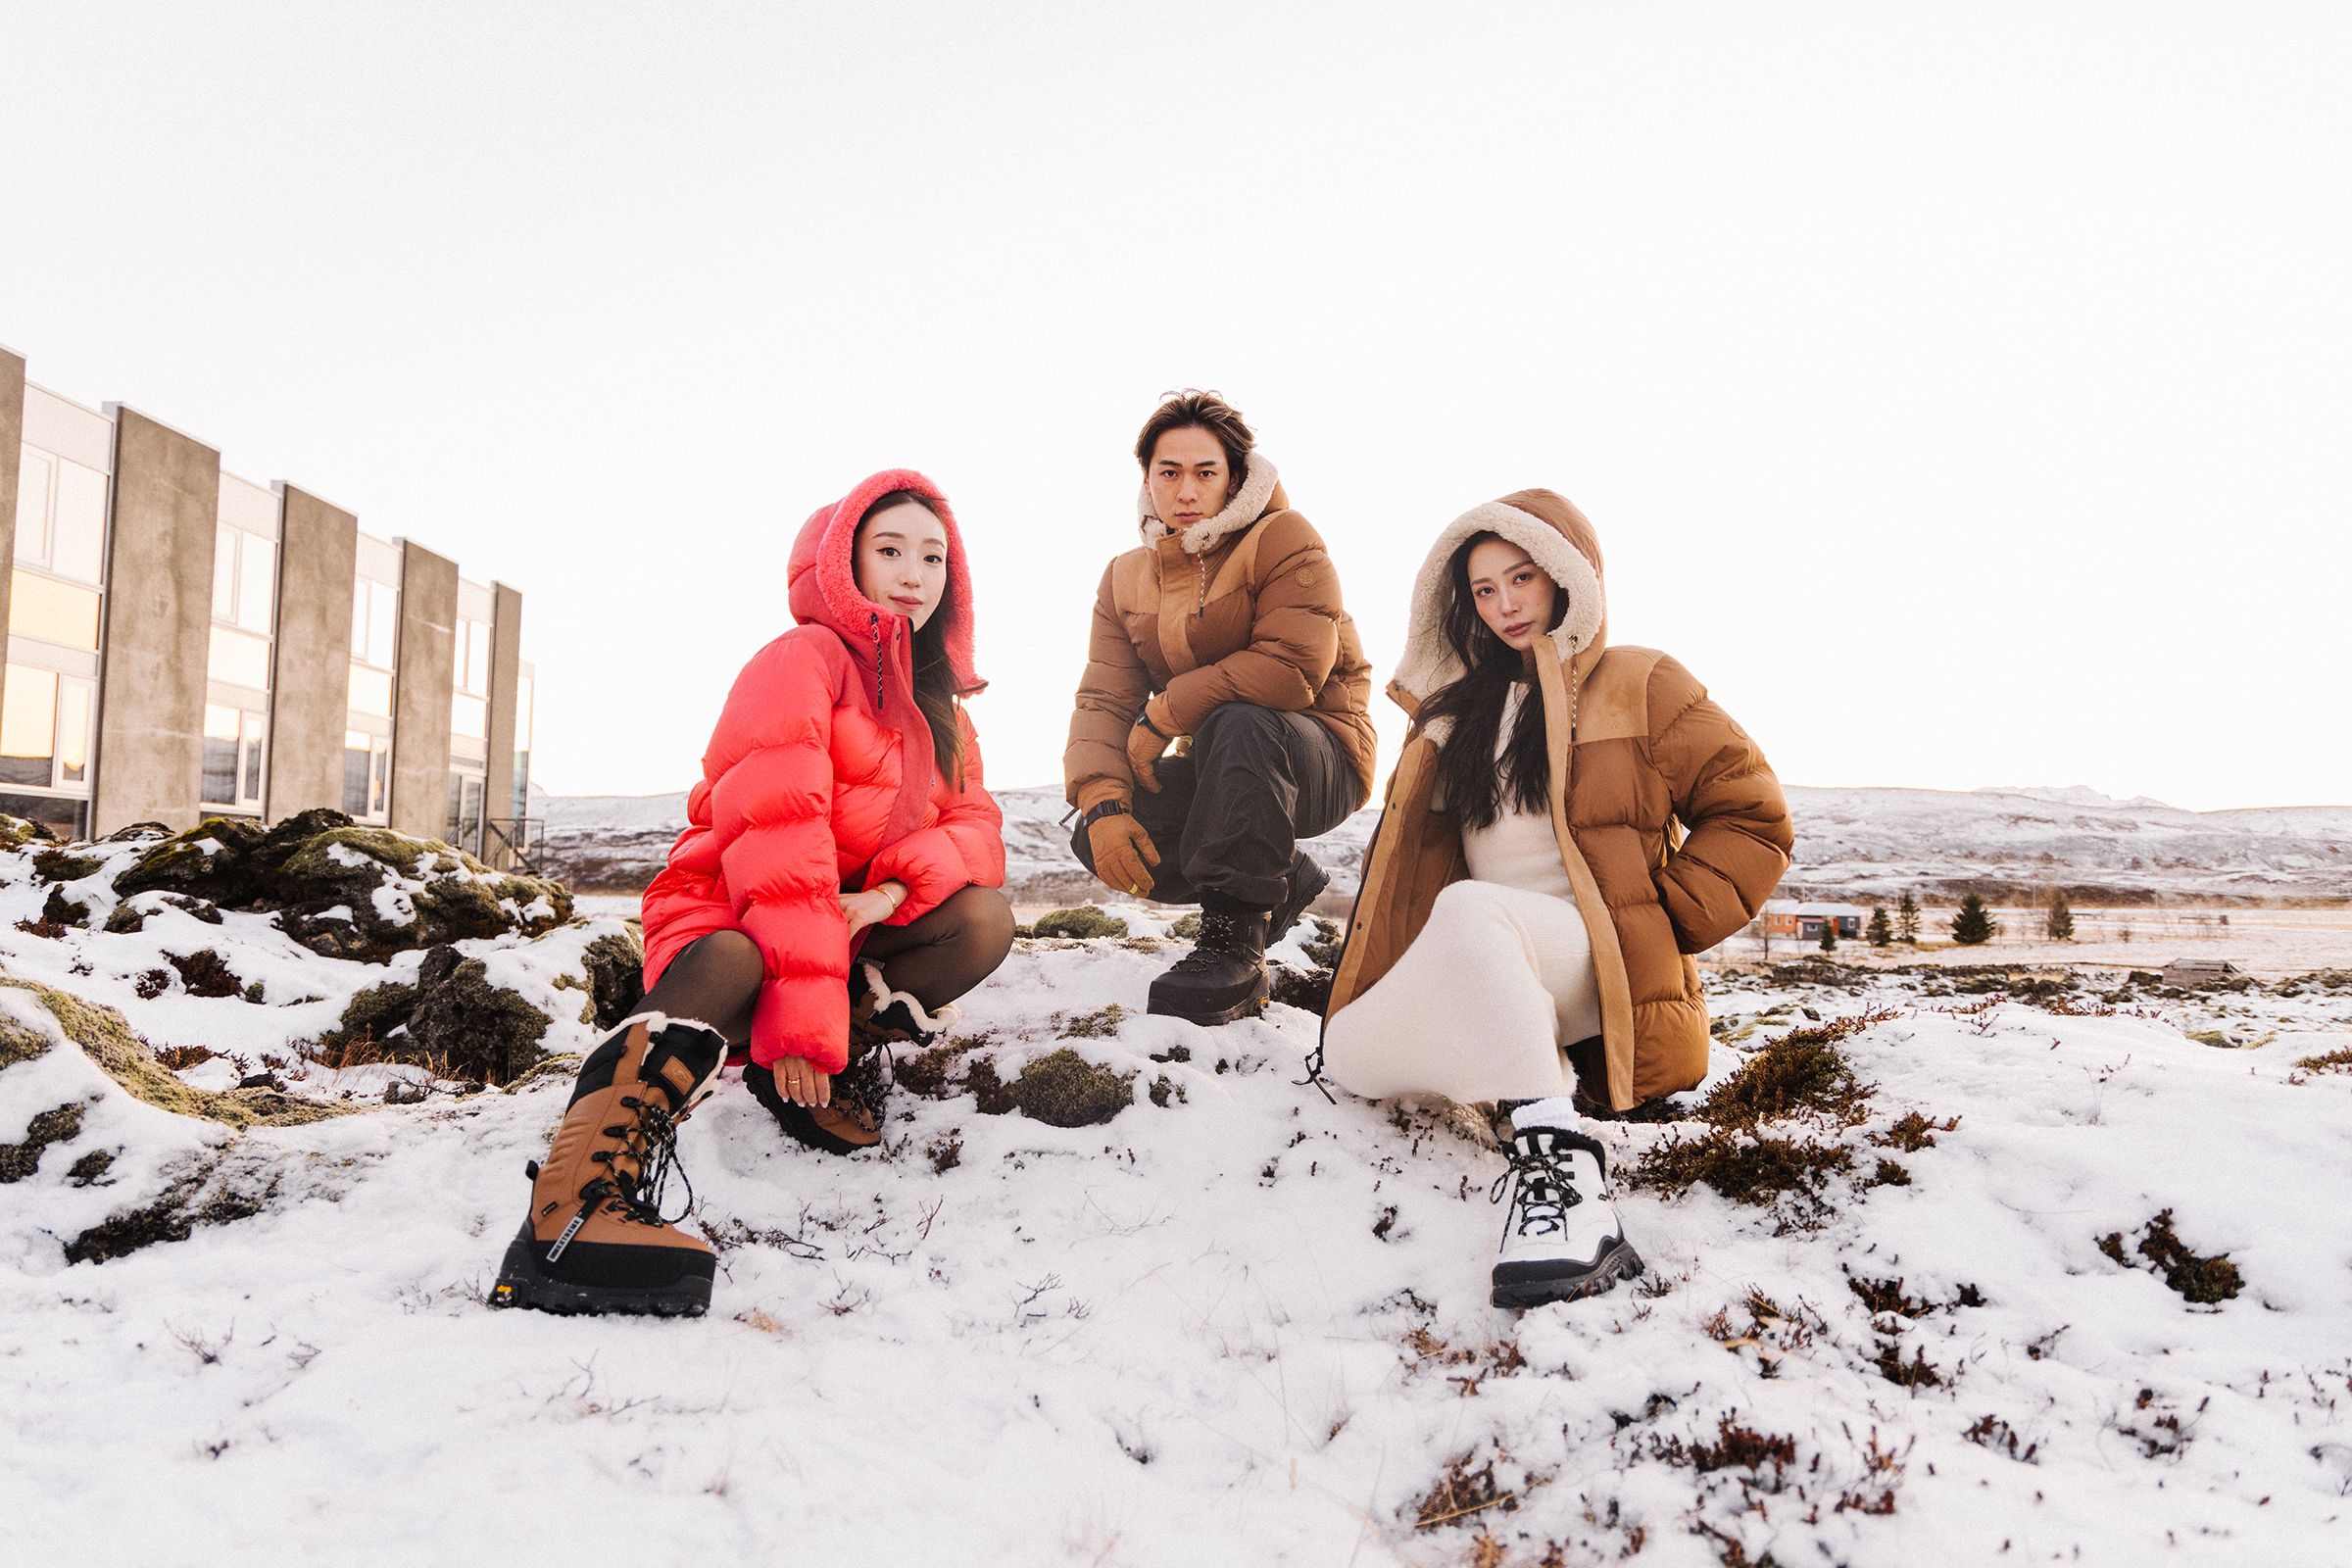 The New Ugg Extreme Collection Is Built for Winter